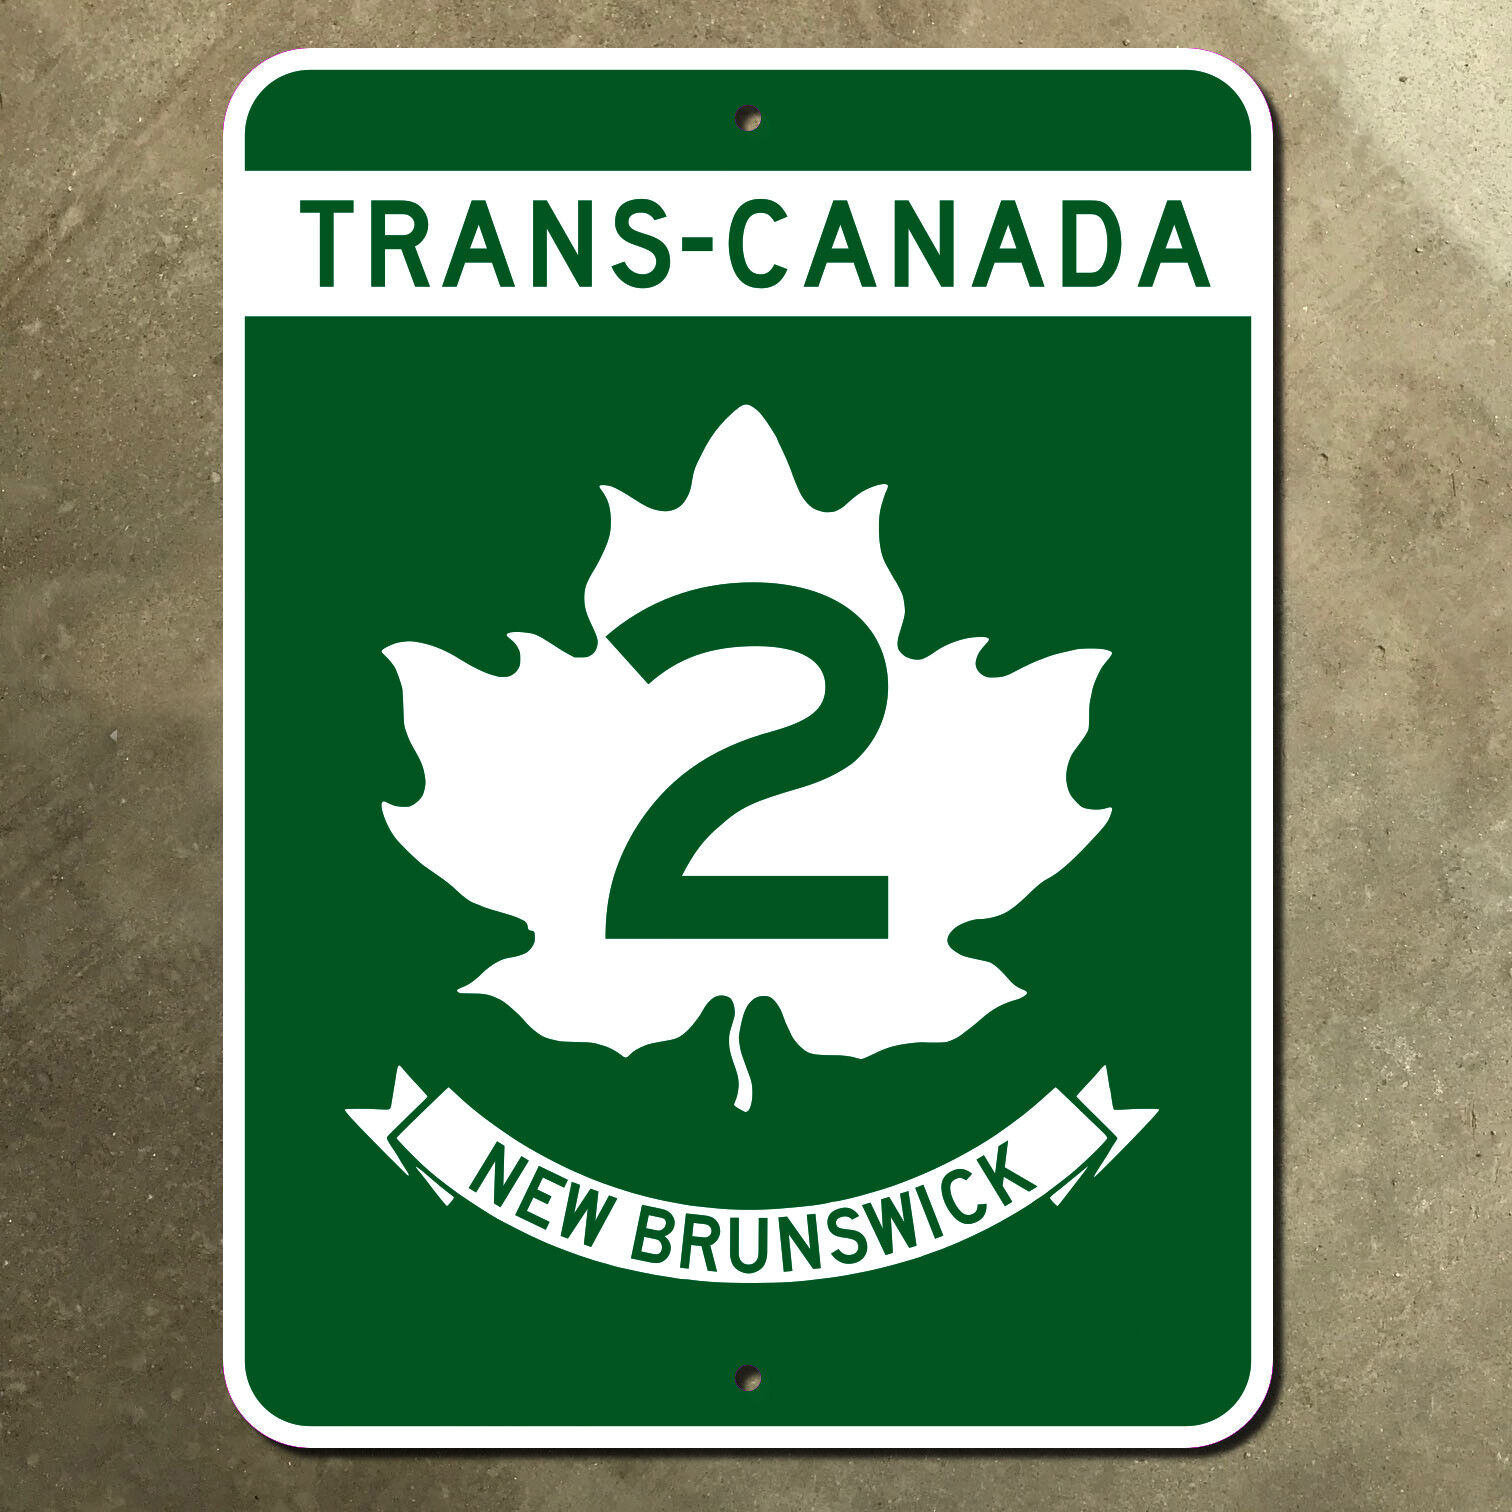 Canada New Brunswick Trans-Canada Highway 2 Moncton marker road sign 1980s 18x24